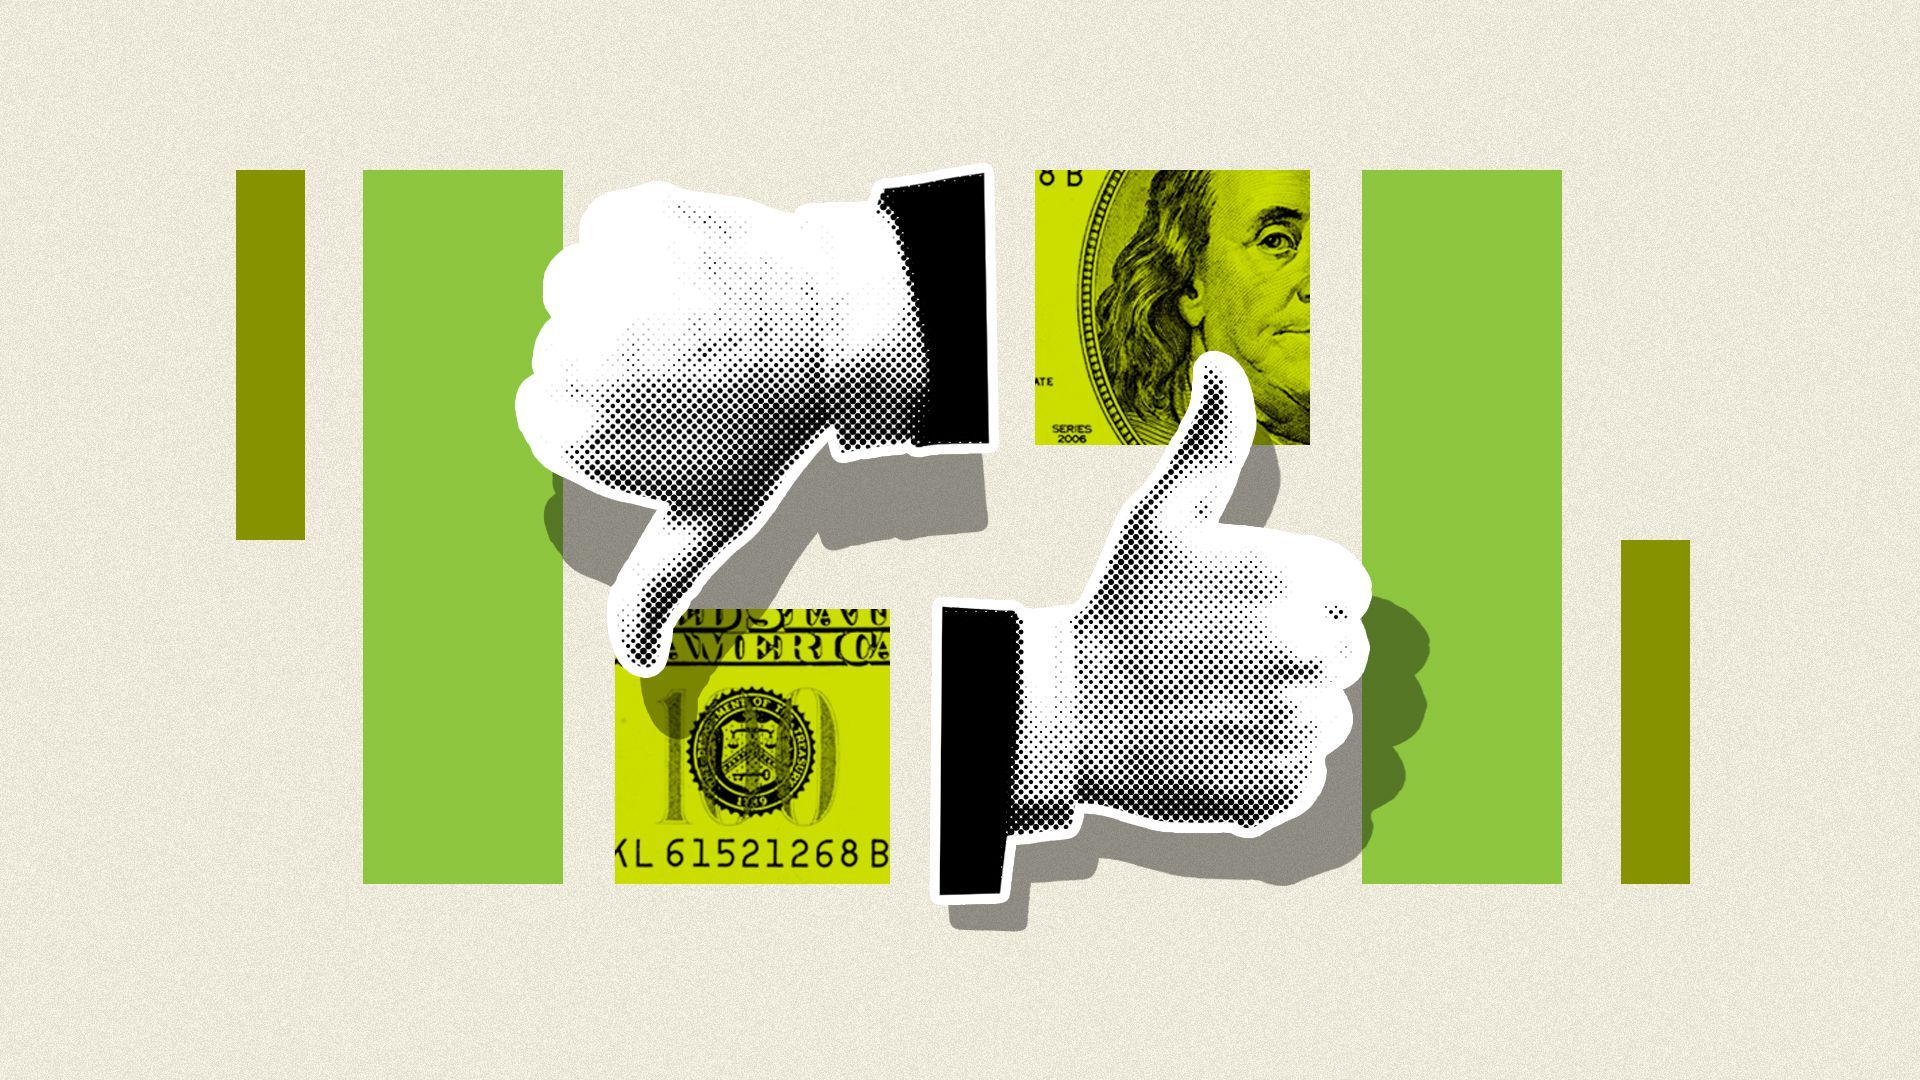 Illustrated collage of two hands, one showing thumbs-up, one showing thumbs-down, elements of a hundred-dollar bill and blocks of color. 